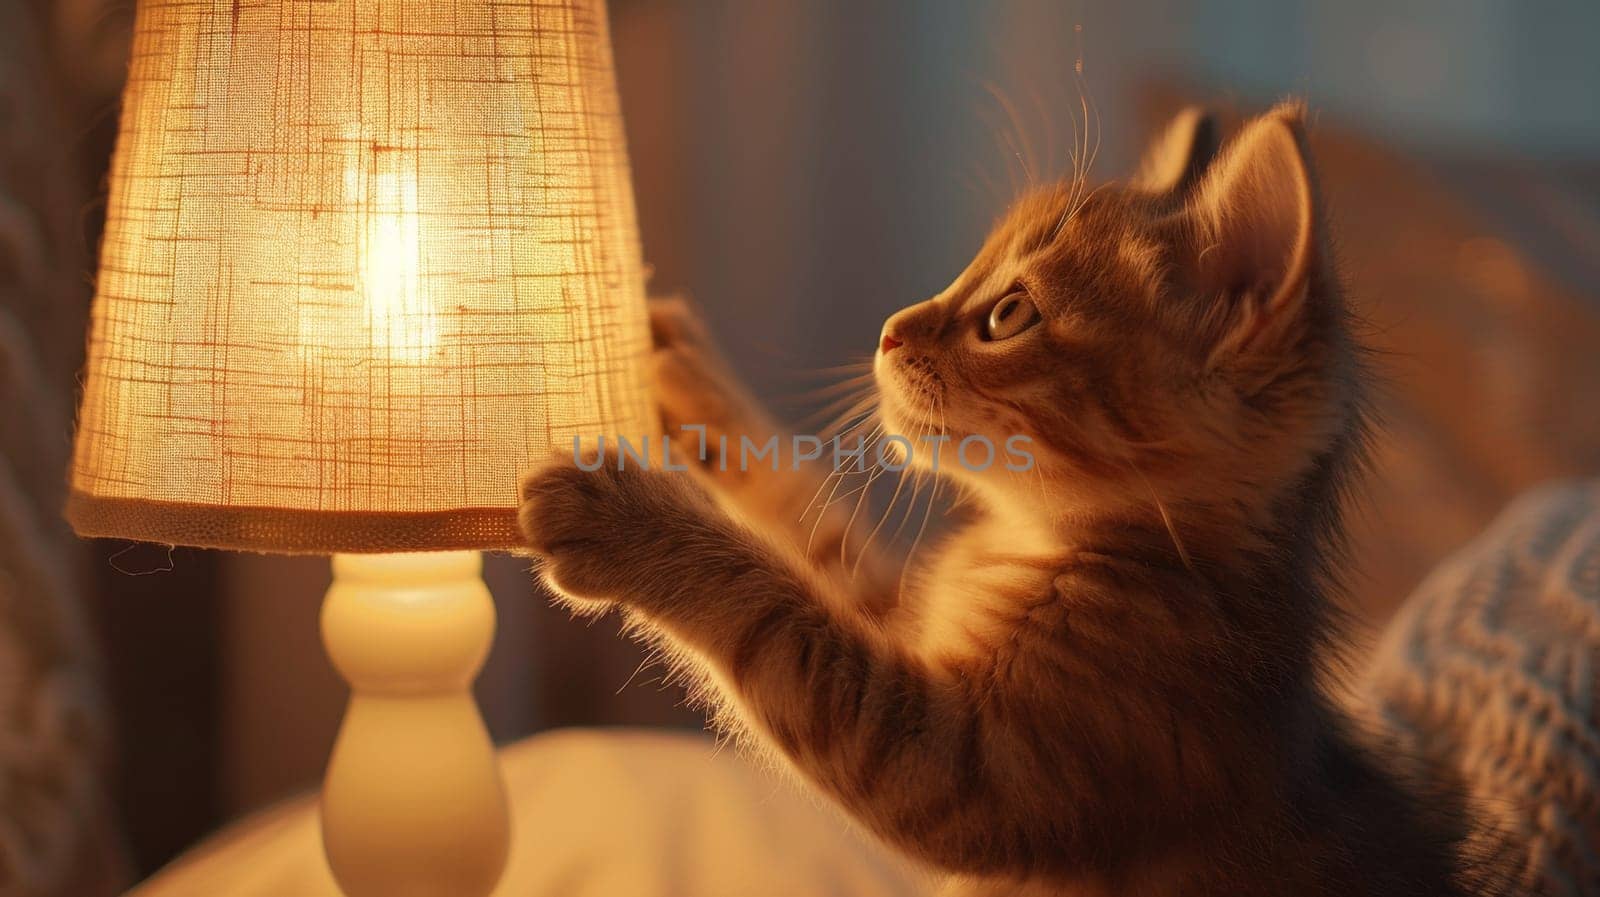 A kitten is playing with a lamp shade on the bed